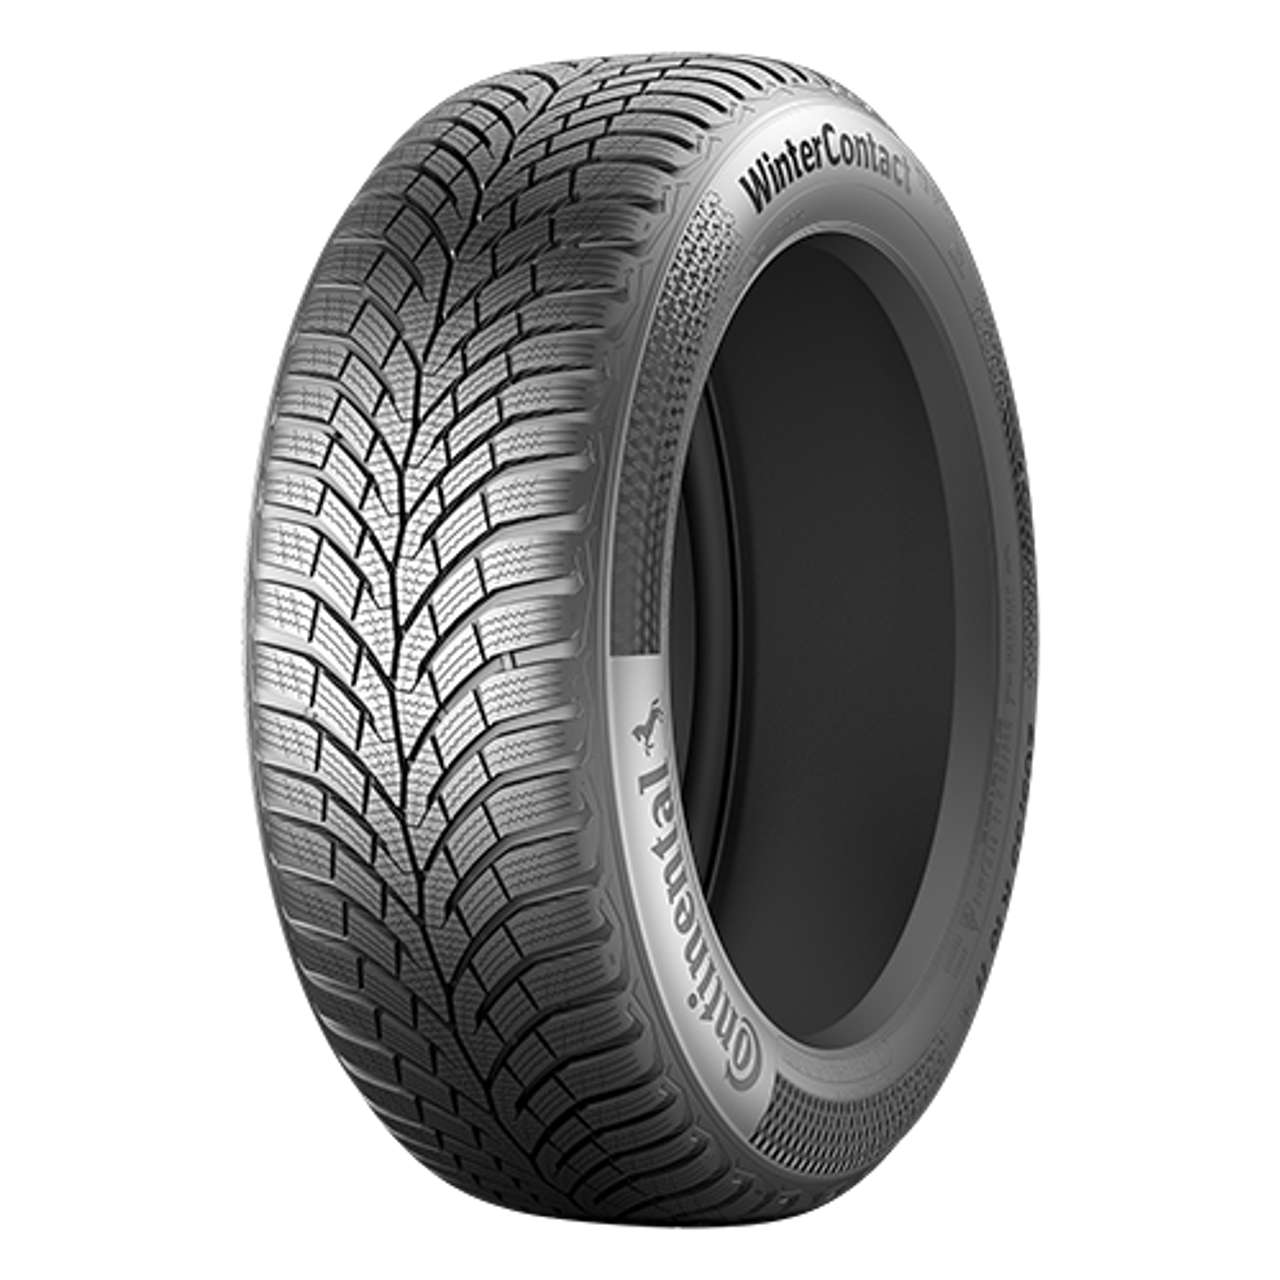 CONTINENTAL WINTERCONTACT TS 870 (EVc) 155/65R14 75T BSW von Continental